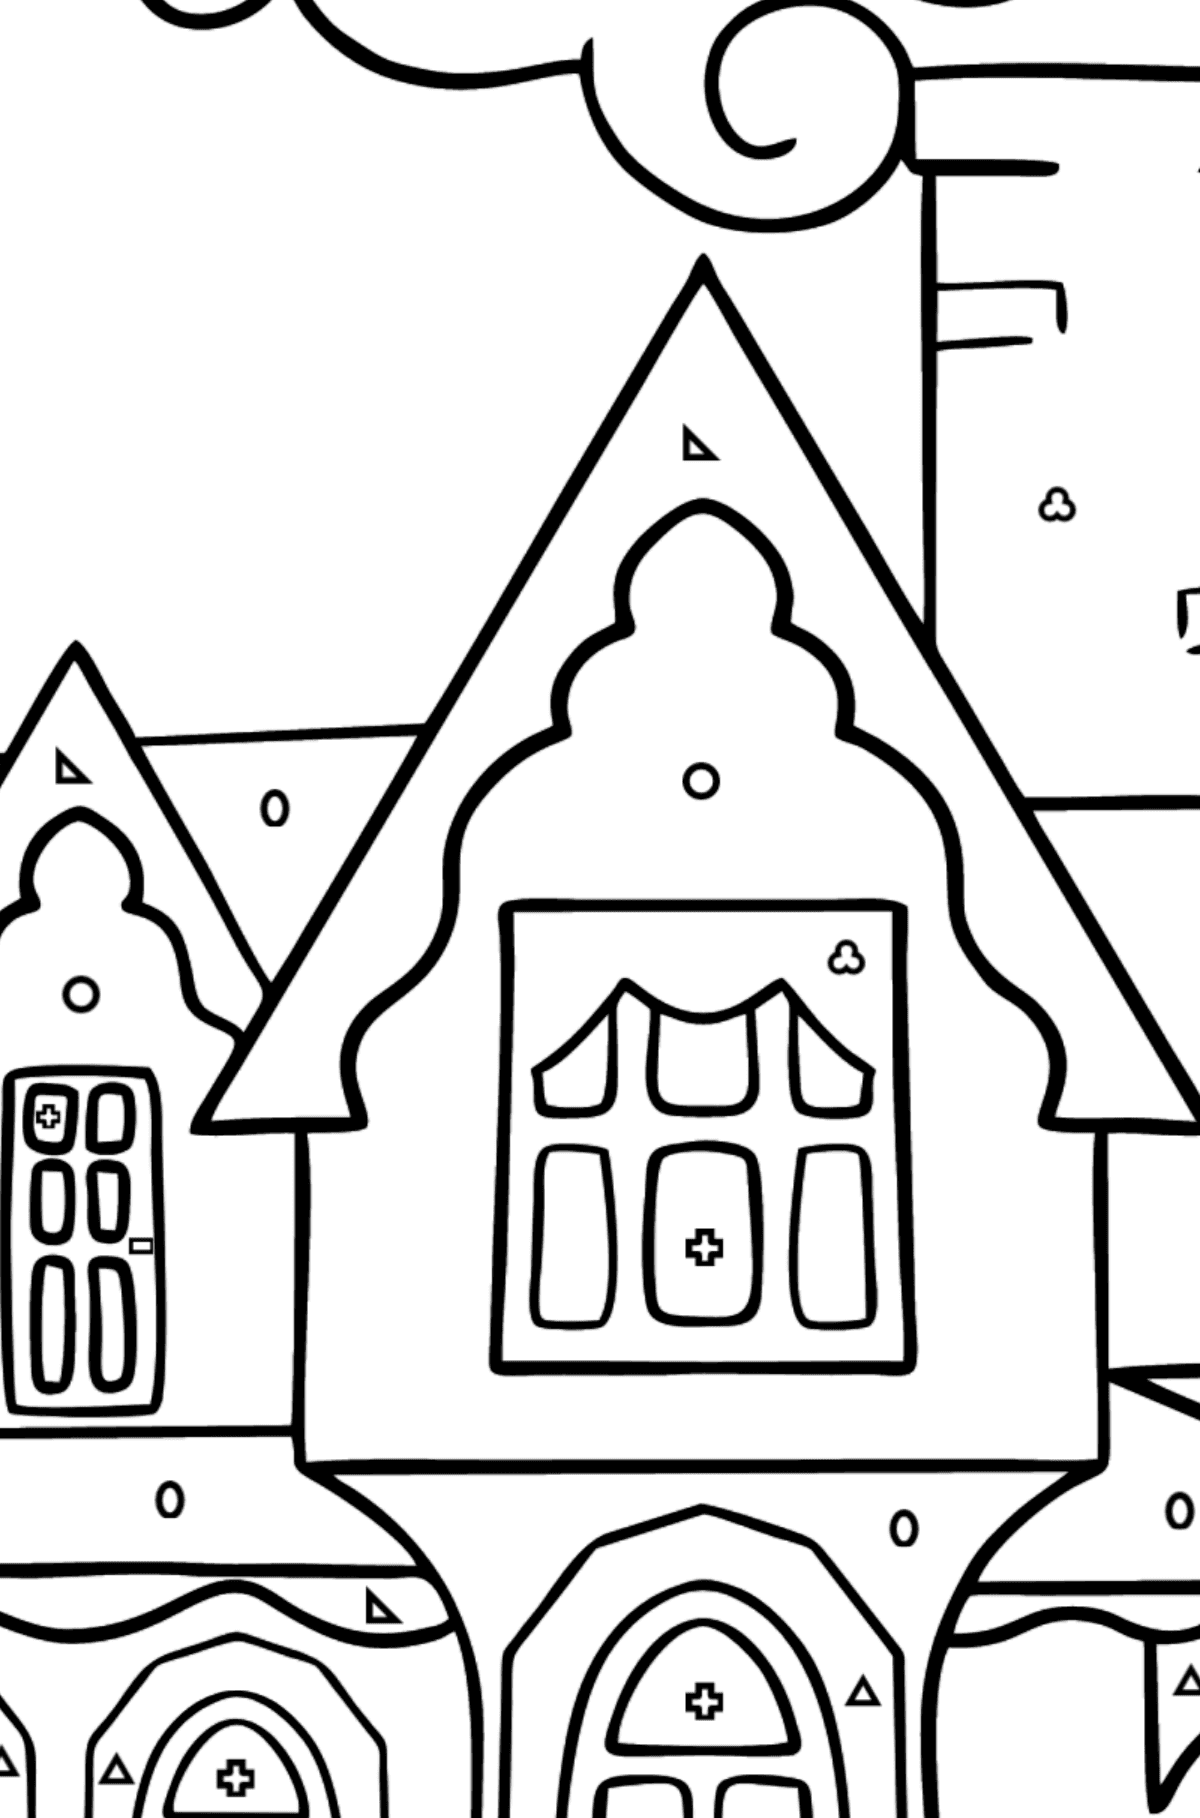 Coloring Page - A Miraculous House - Coloring by Geometric Shapes for Kids